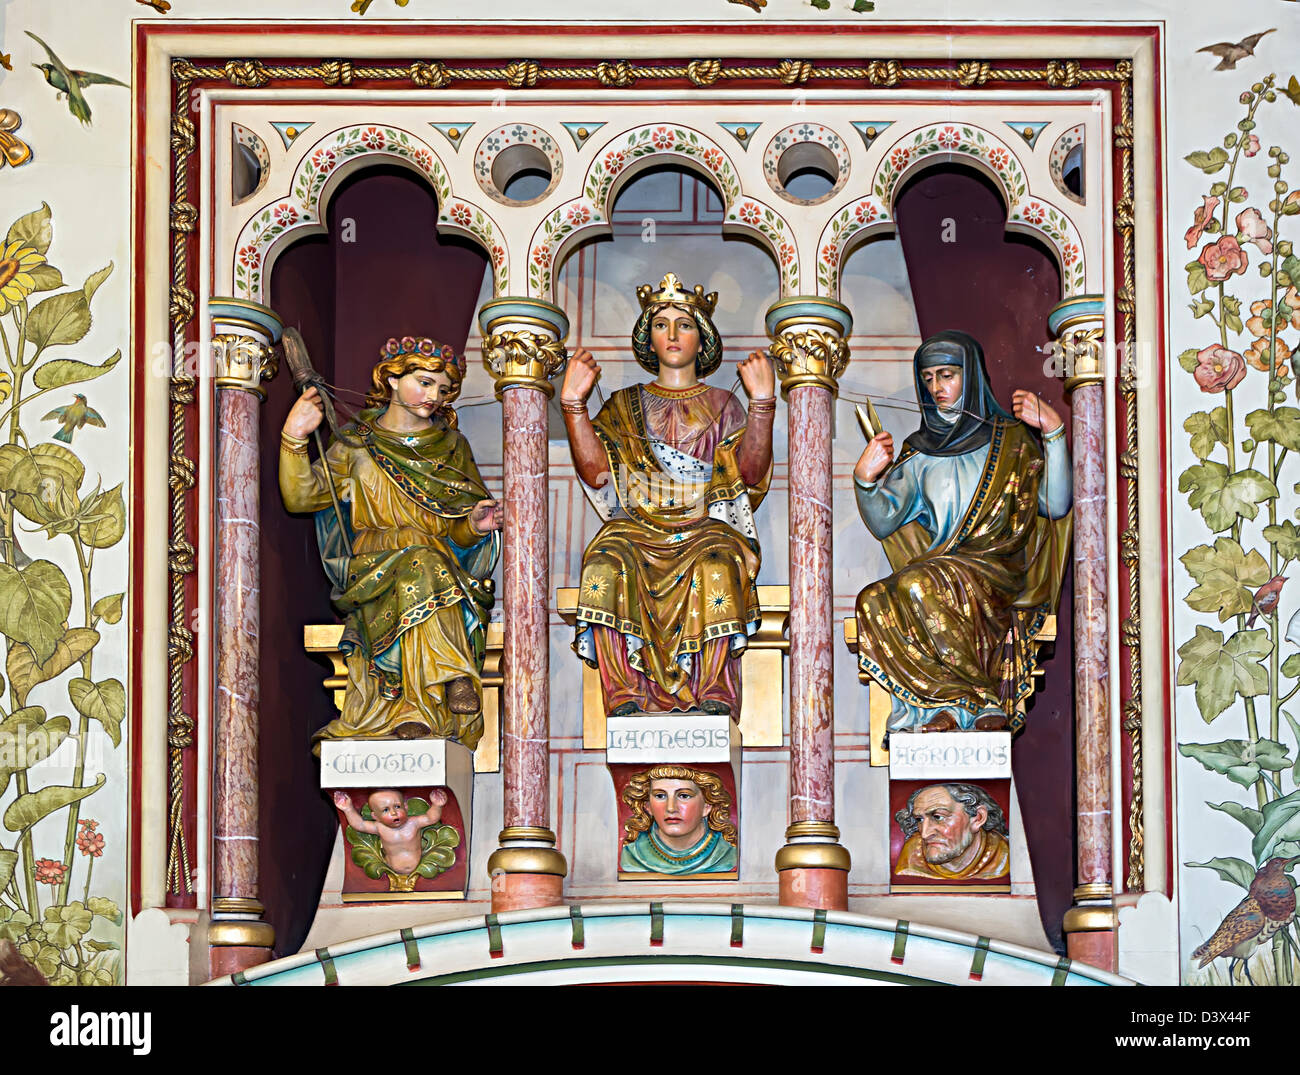 Clotho, Lachesis and Atropos, the three fates from Greek mythology, in Castell Coch castle, Tongwynlais, Cardiff, Wales, UK Stock Photo